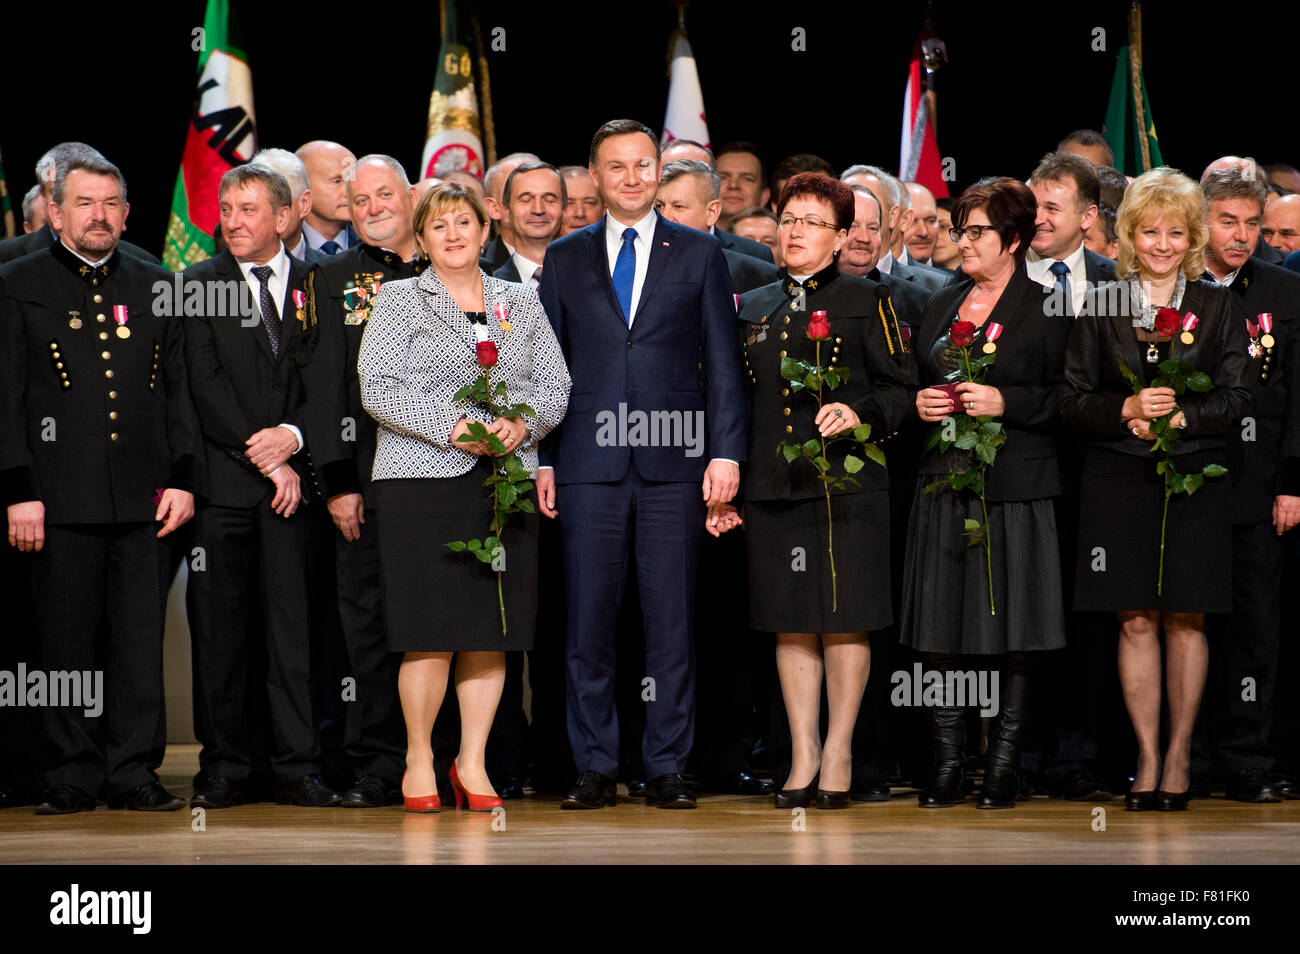 Belchatow, Poland. 4th December, 2015. President of Poland, Andrzej Duda, poses for picture with Polish miners, during 'Barbórka' - the annual Miners' Day. Credit:  Marcin Rozpedowski/Alamy Live News Stock Photo